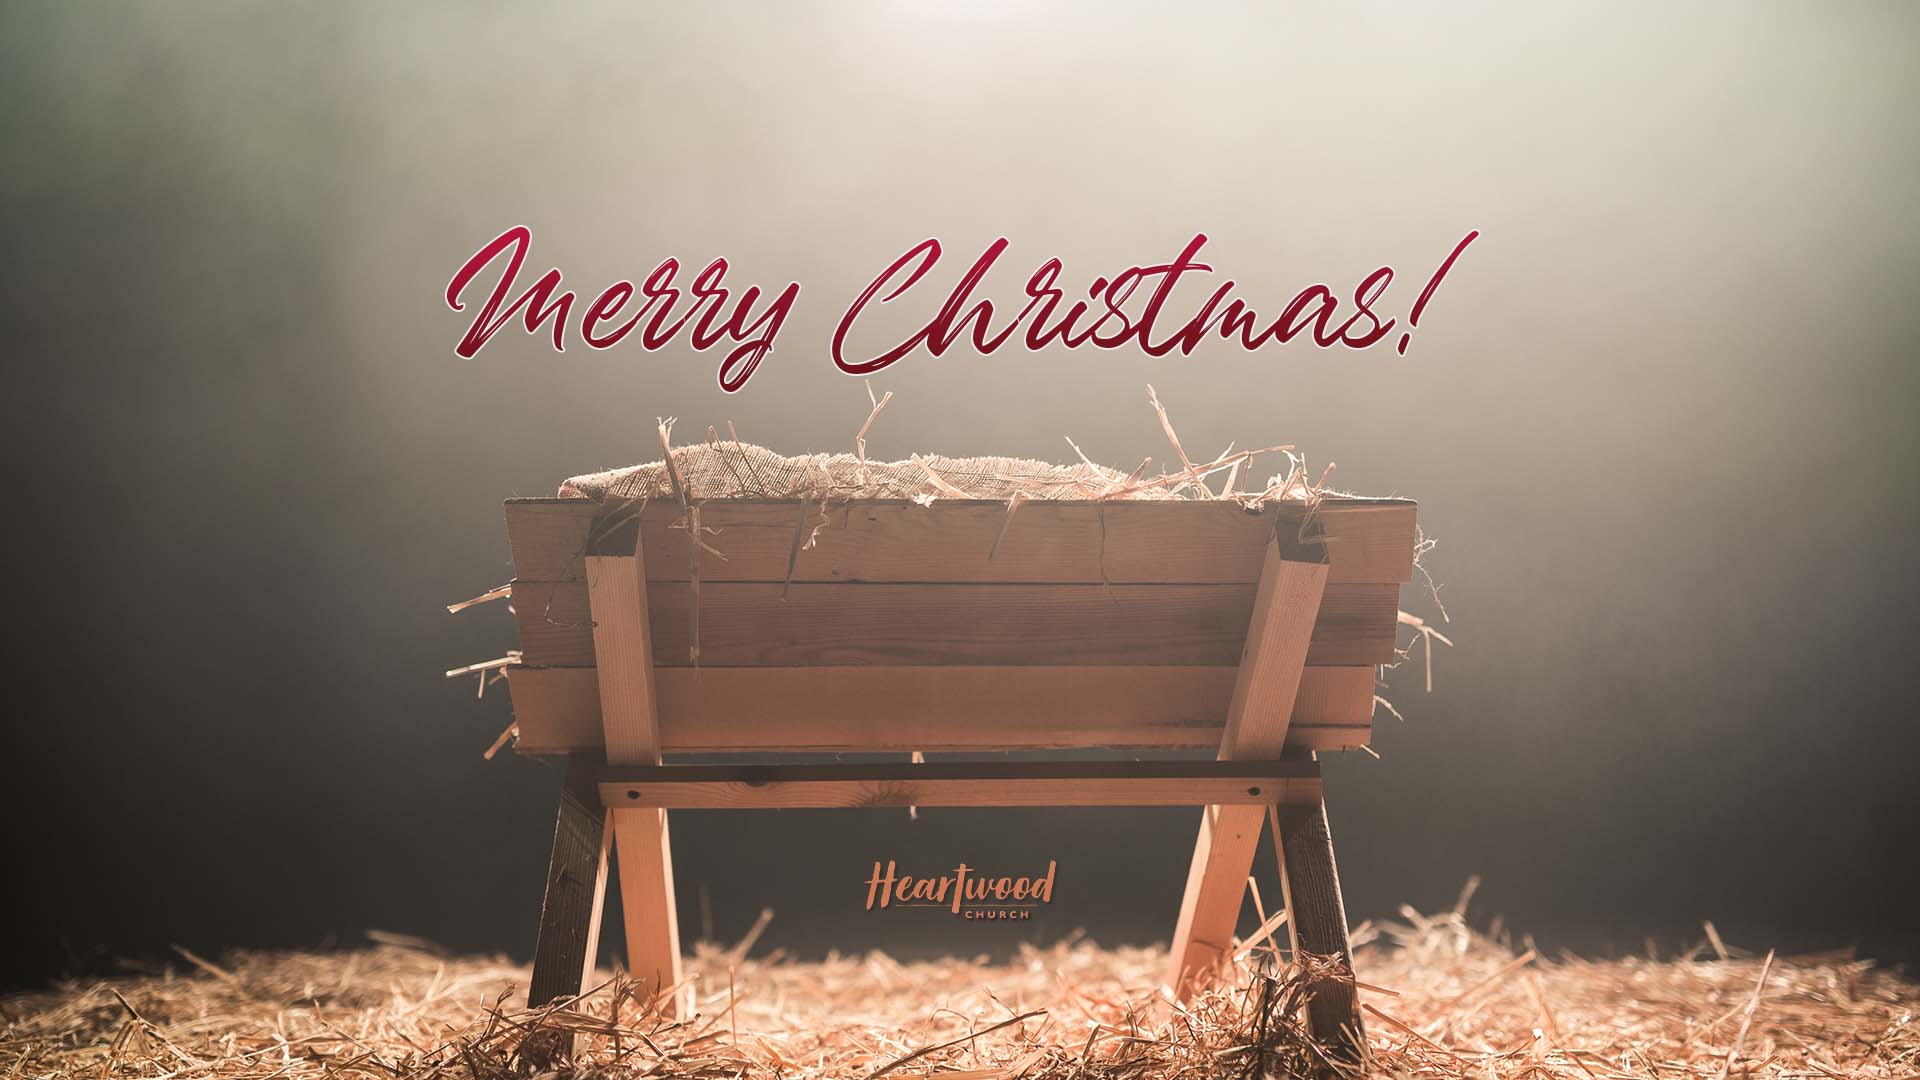 Merry Christmas from Heartwood Church!